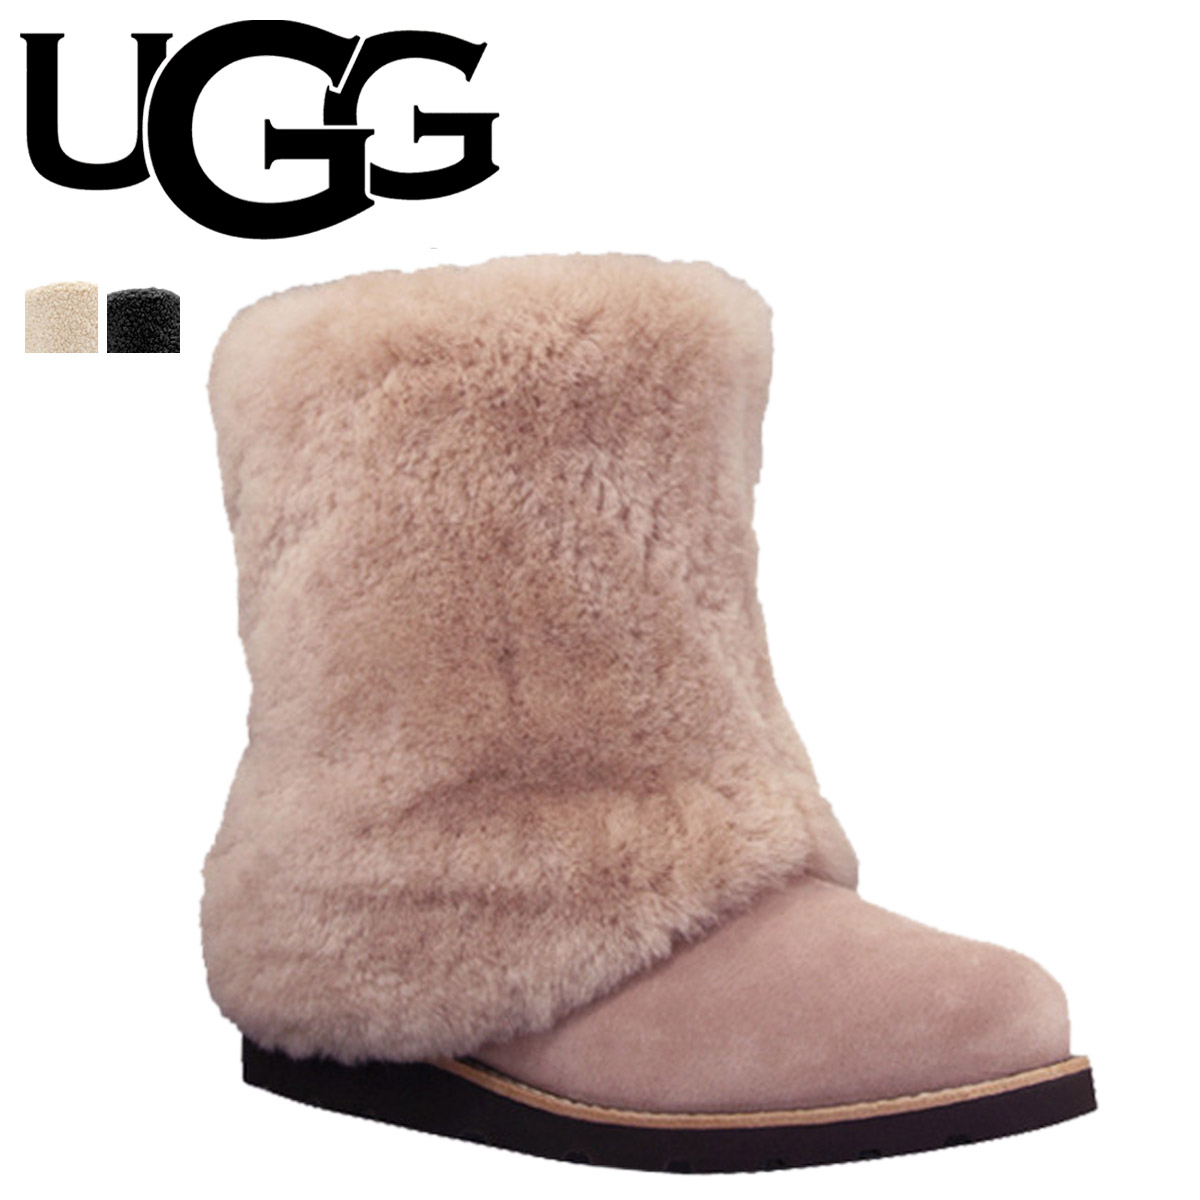 where can i get uggs near me